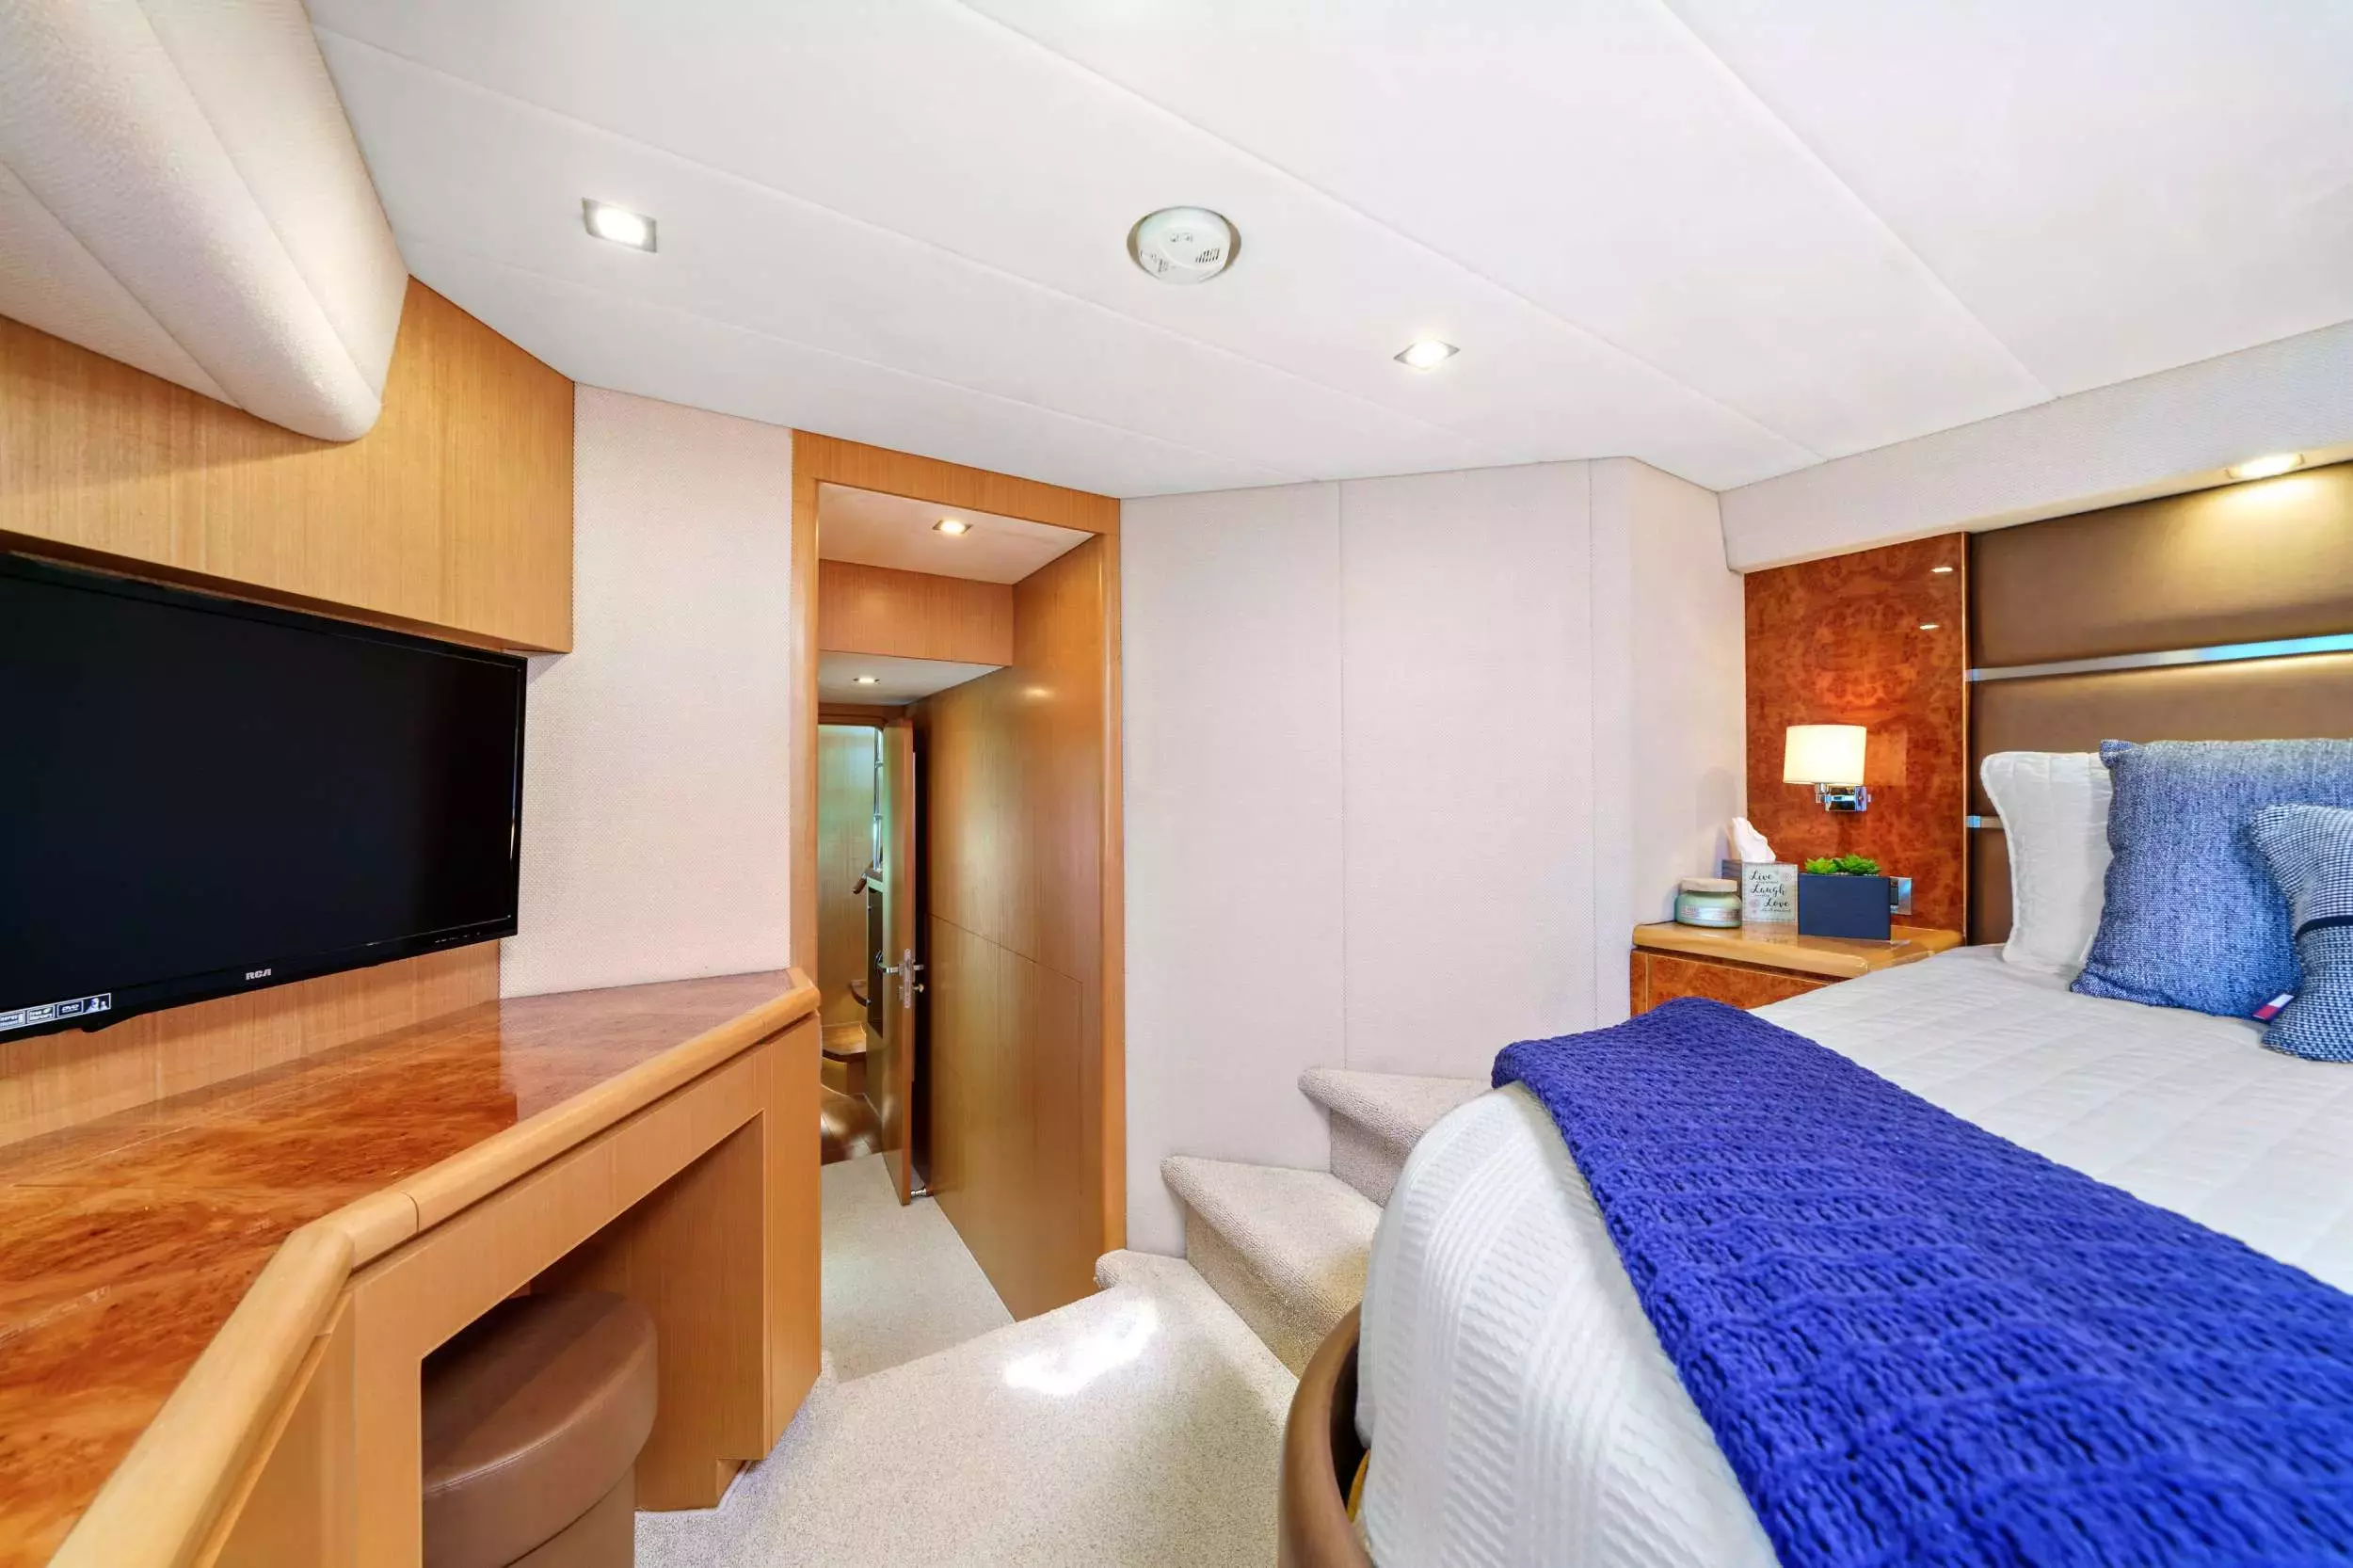 Indigo III by Horizon - Top rates for a Charter of a private Power Catamaran in Bahamas